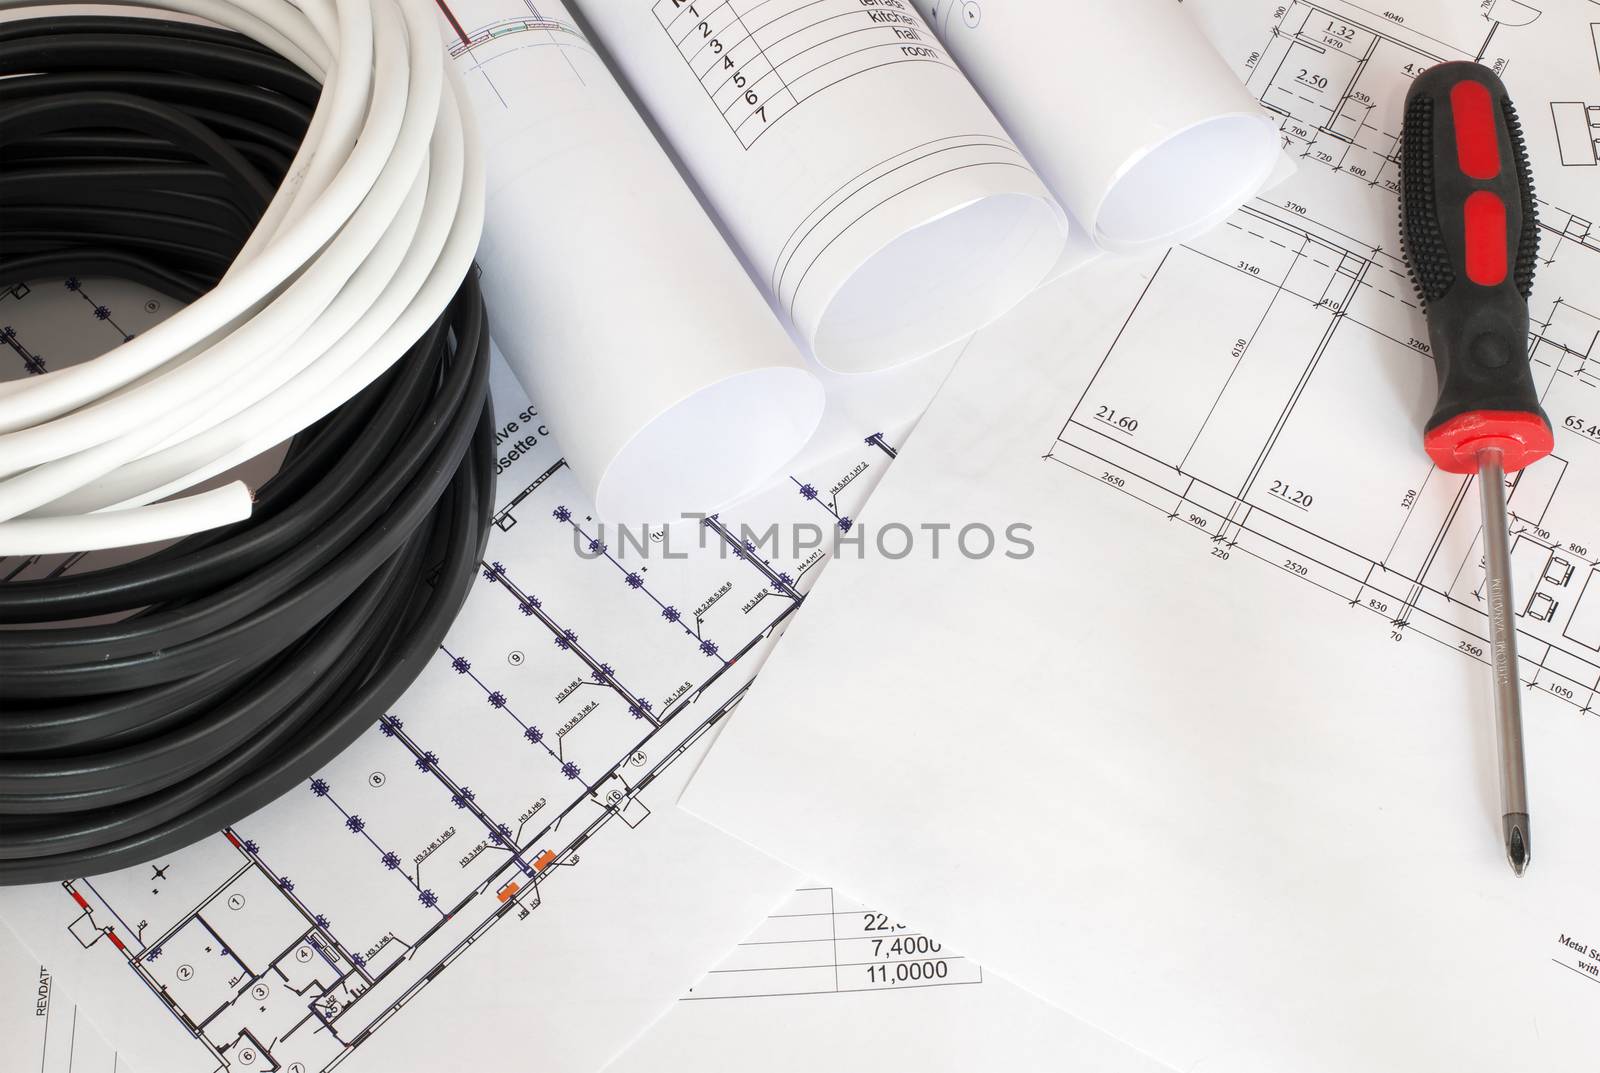 Electrical cable on the construction drawings. Repair and construction of electric systems